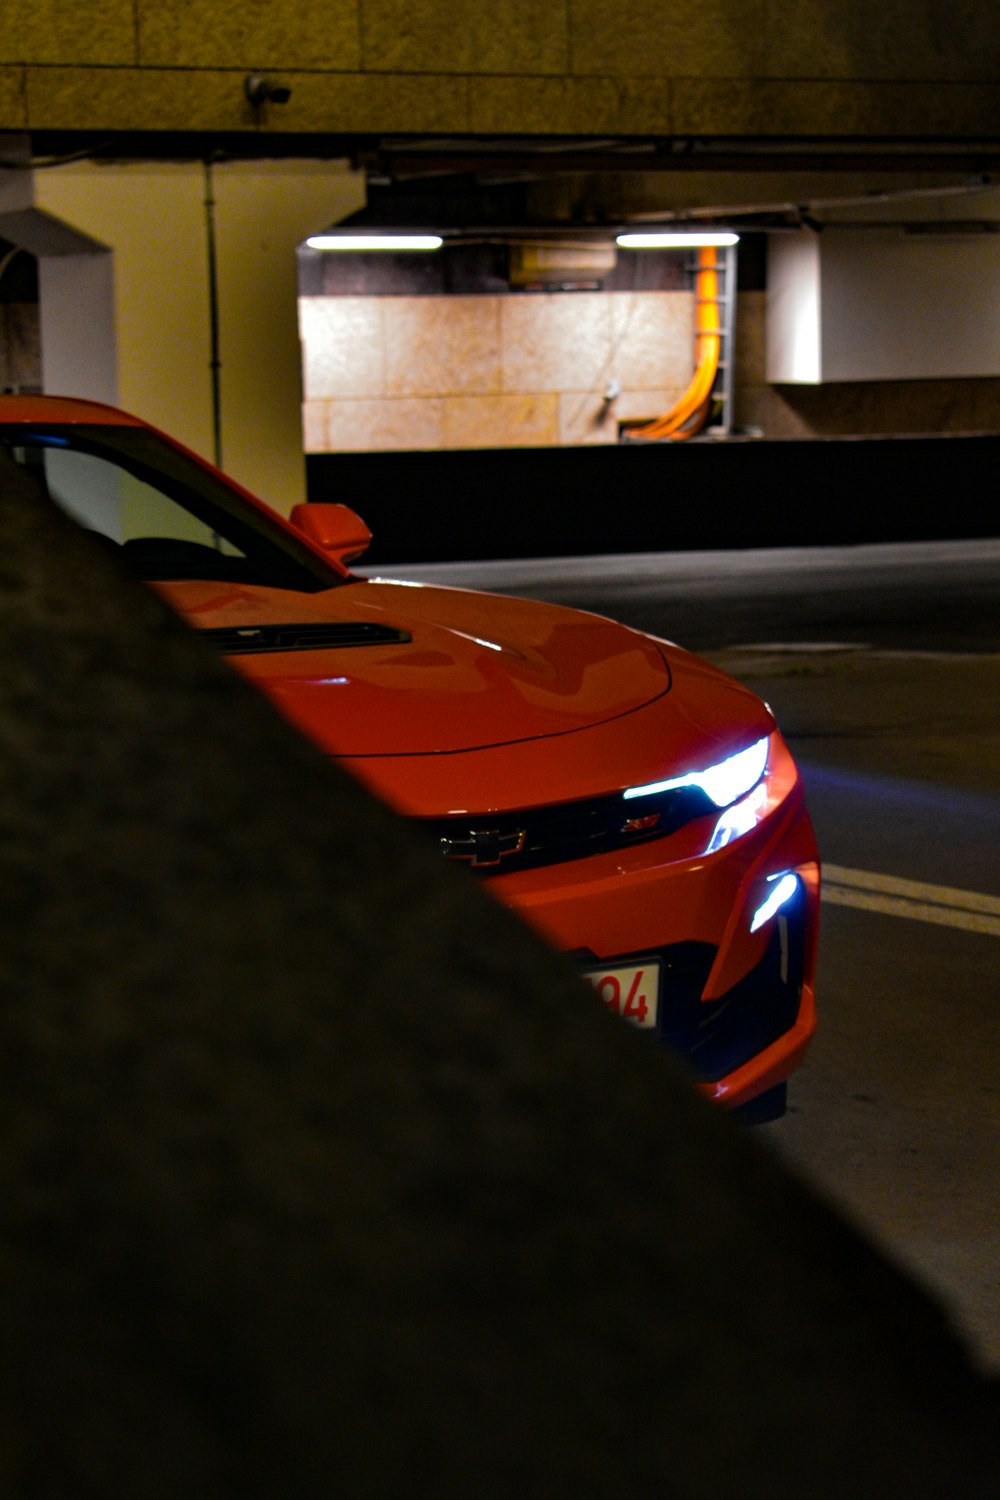 a red sports car parked in a parking garage